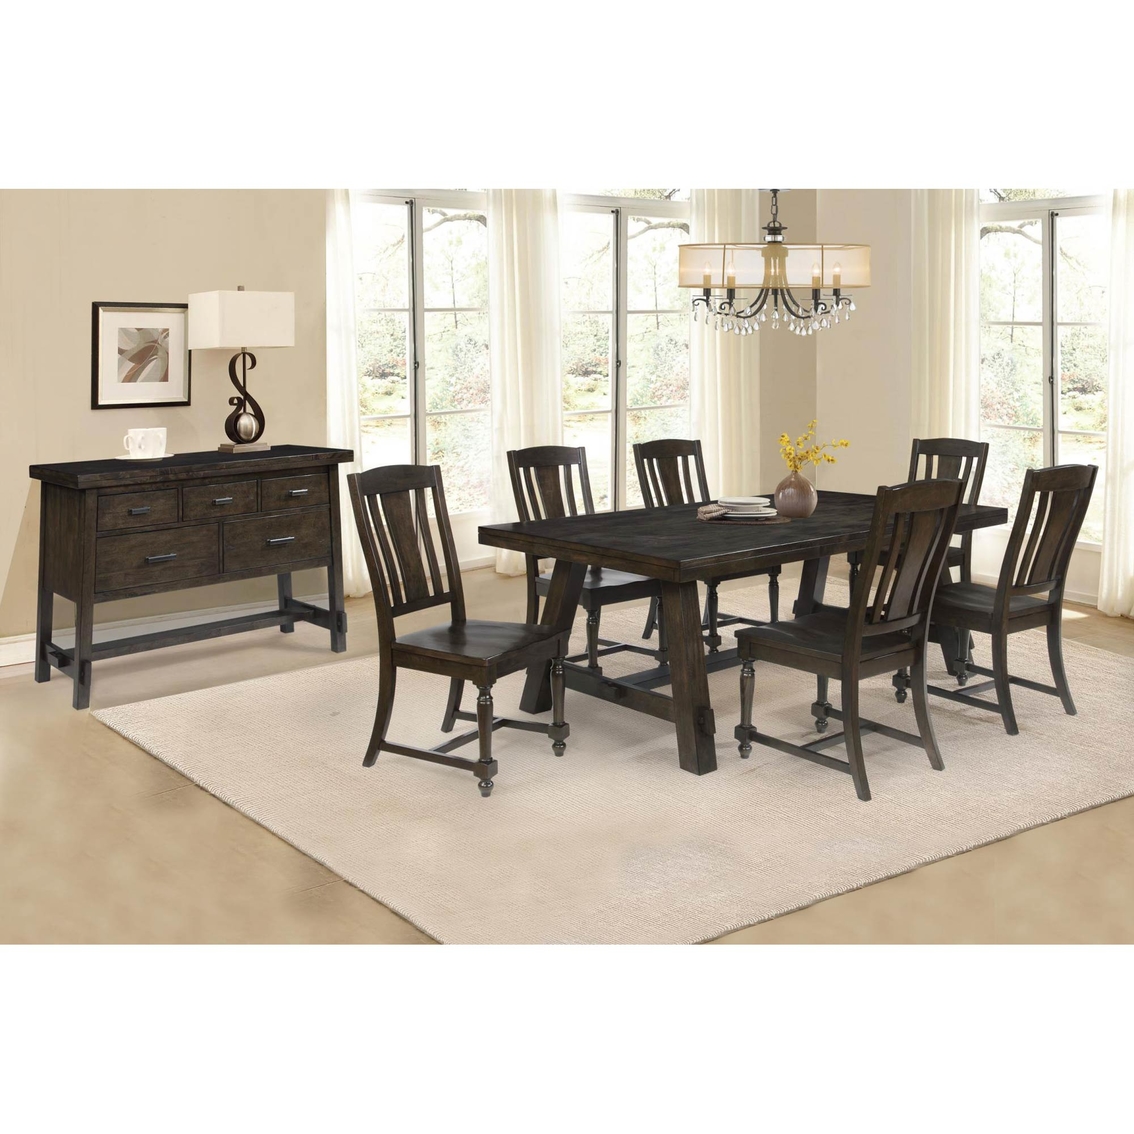 Chelsea Home Furniture Brooke View Server - Image 2 of 2